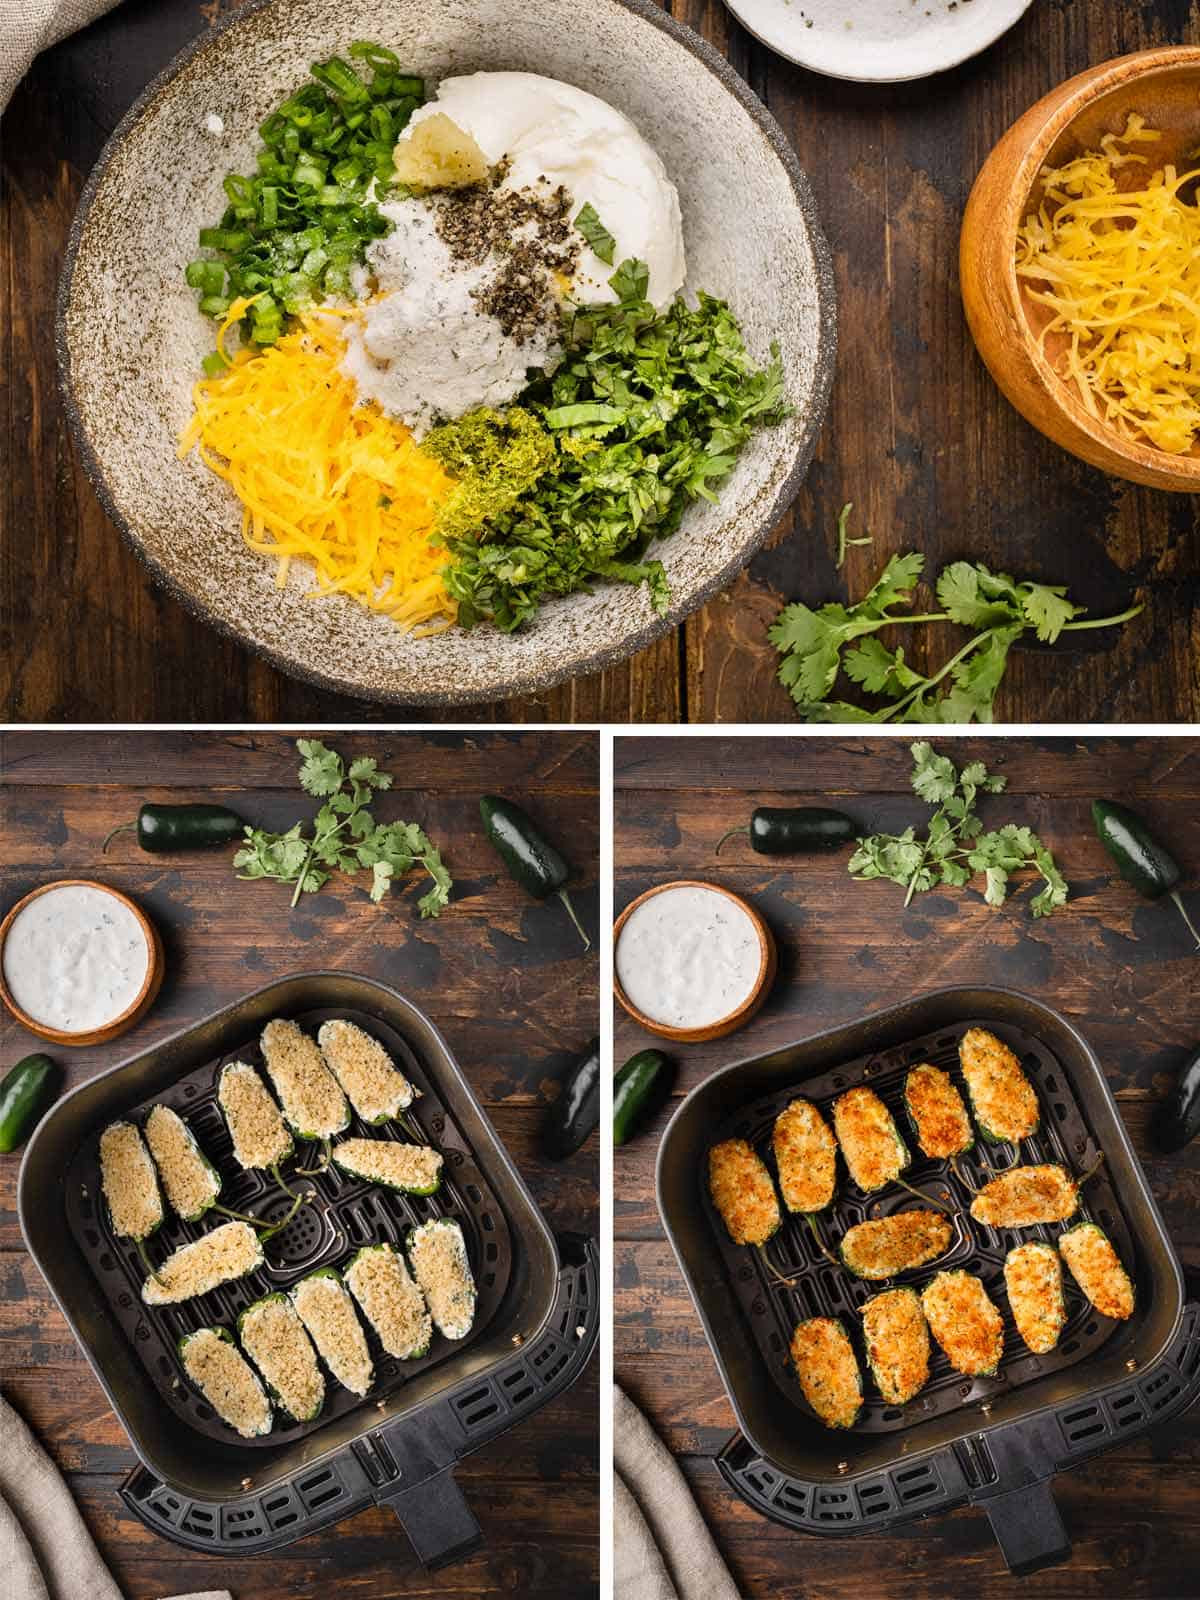 A collage shows how to cook stuffed jalapeno peppers in air fryer.